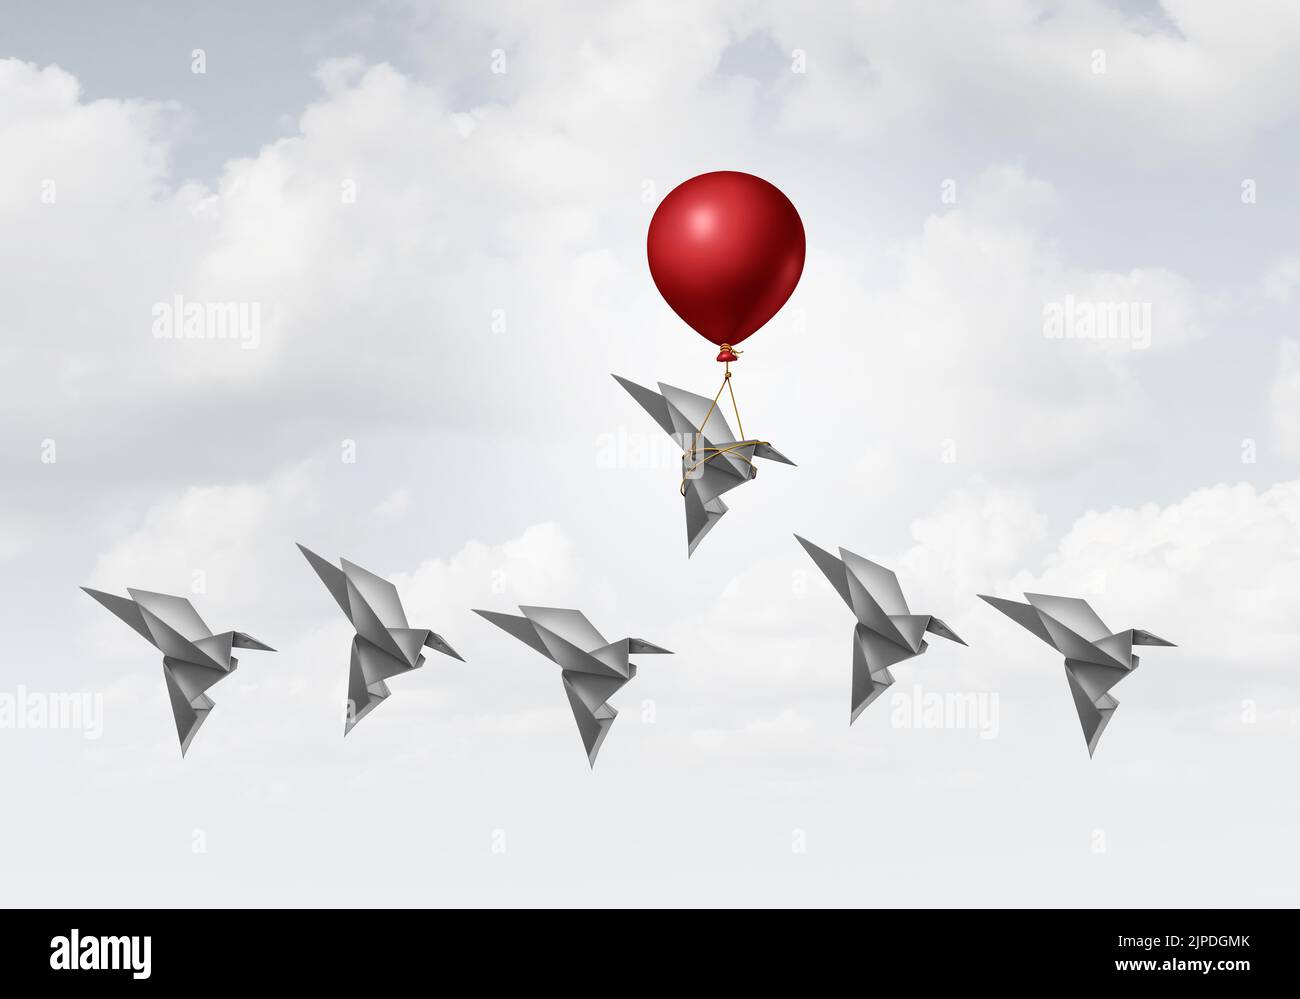 Strategic leadership advantage metaphor as a leader using winning tools to win over the competition as an origami bird flying higher with a balloon. Stock Photo